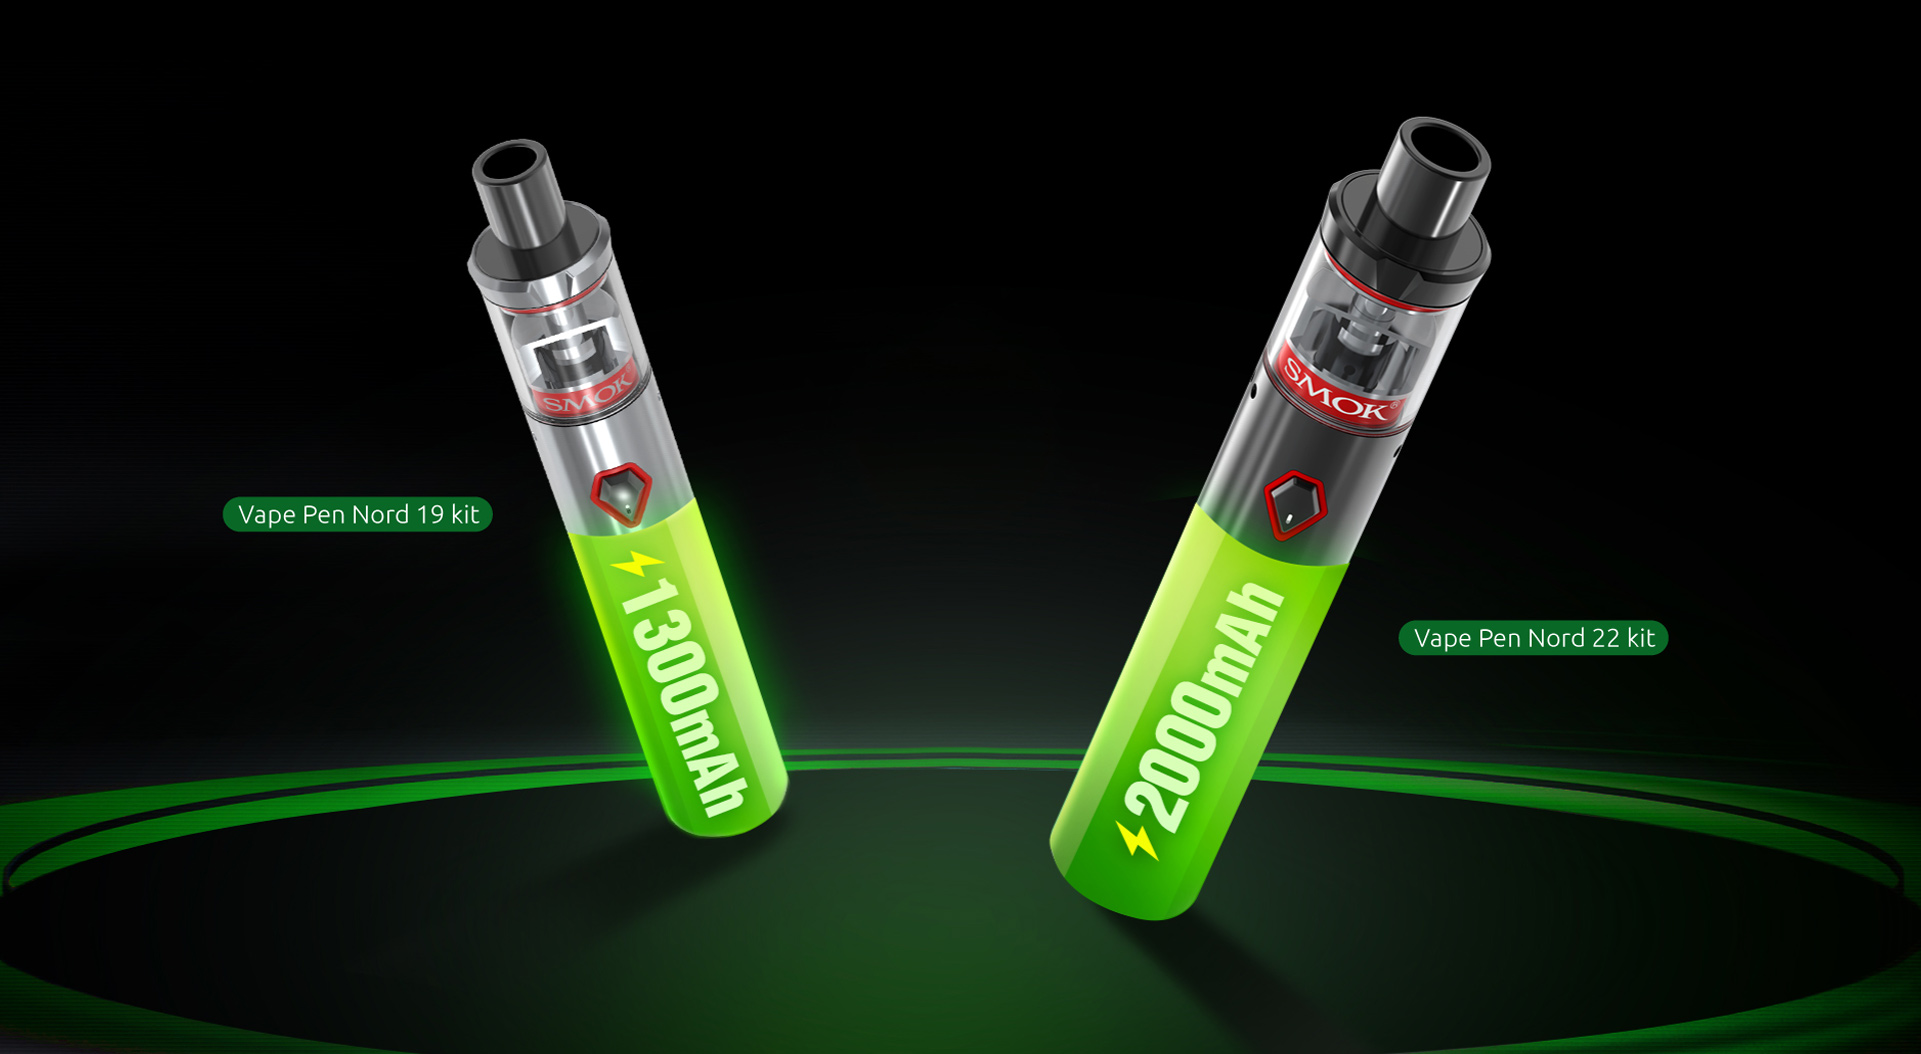 SMOK Vape Pen Nord 19&22 Kit with High Capacity Rechargeable Lithium Battery